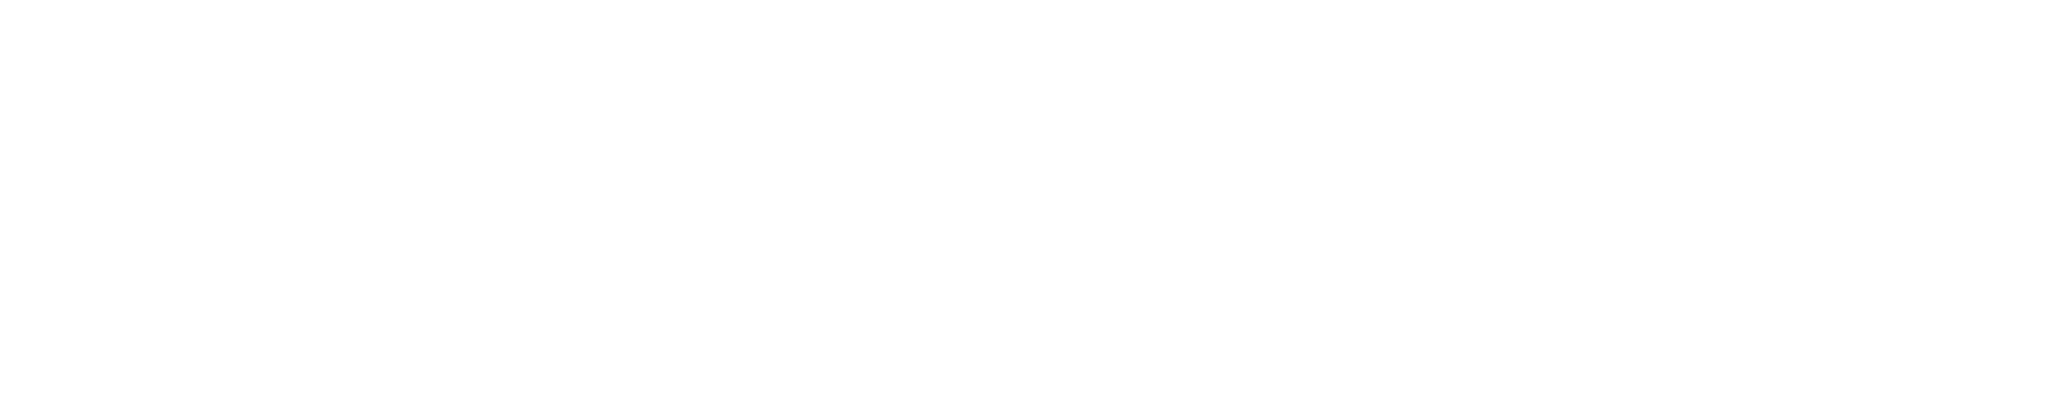 Worry-free in the city ELECTRIC TRANSPORT COOLING FOR SUSTAINABLE DELIVERIES 